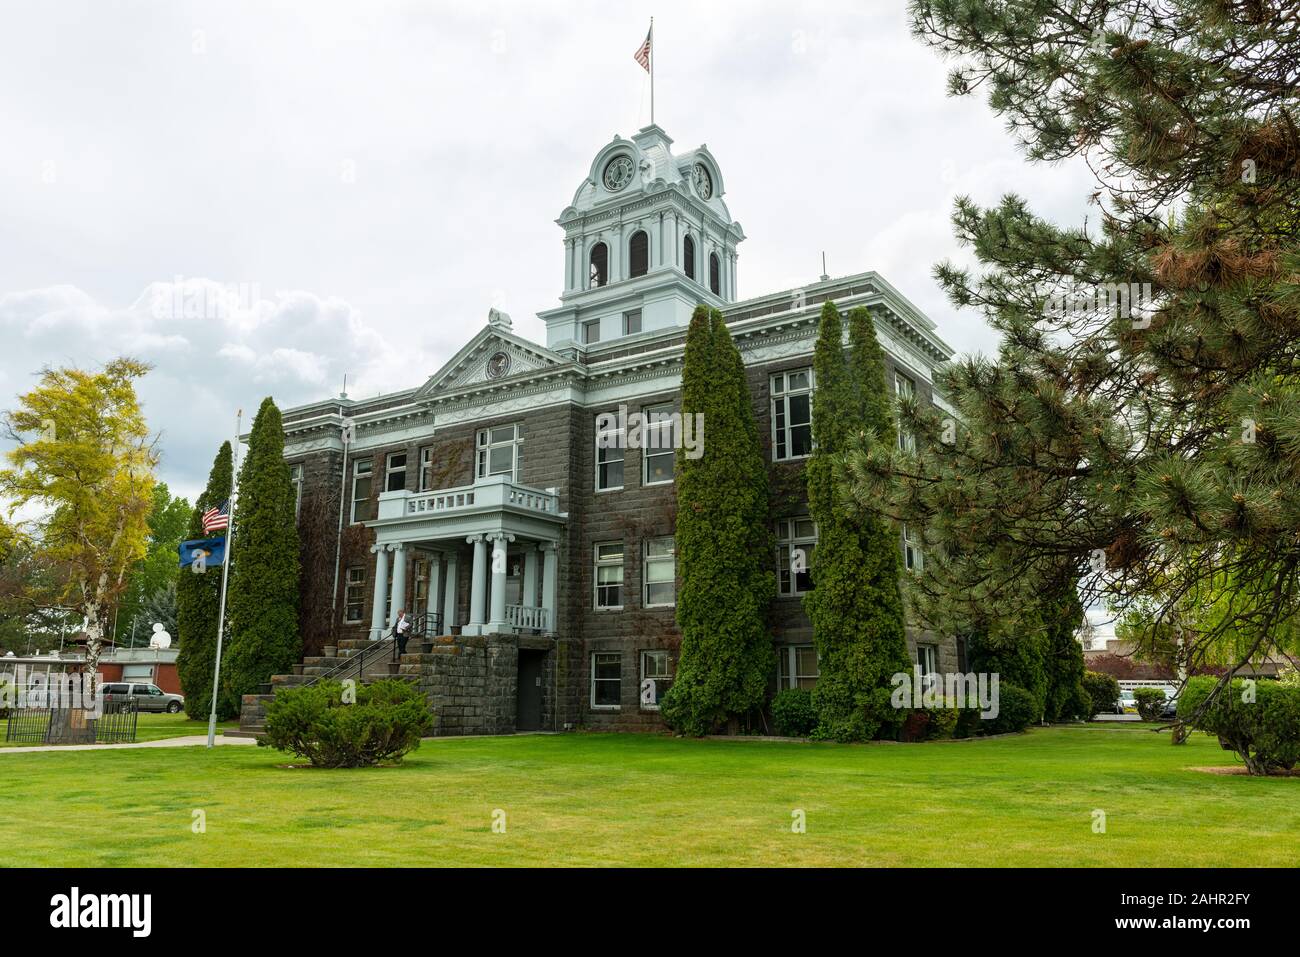 Prineville, Oregon - May 15, 2015: The Crook County Courthouse Stock Photo